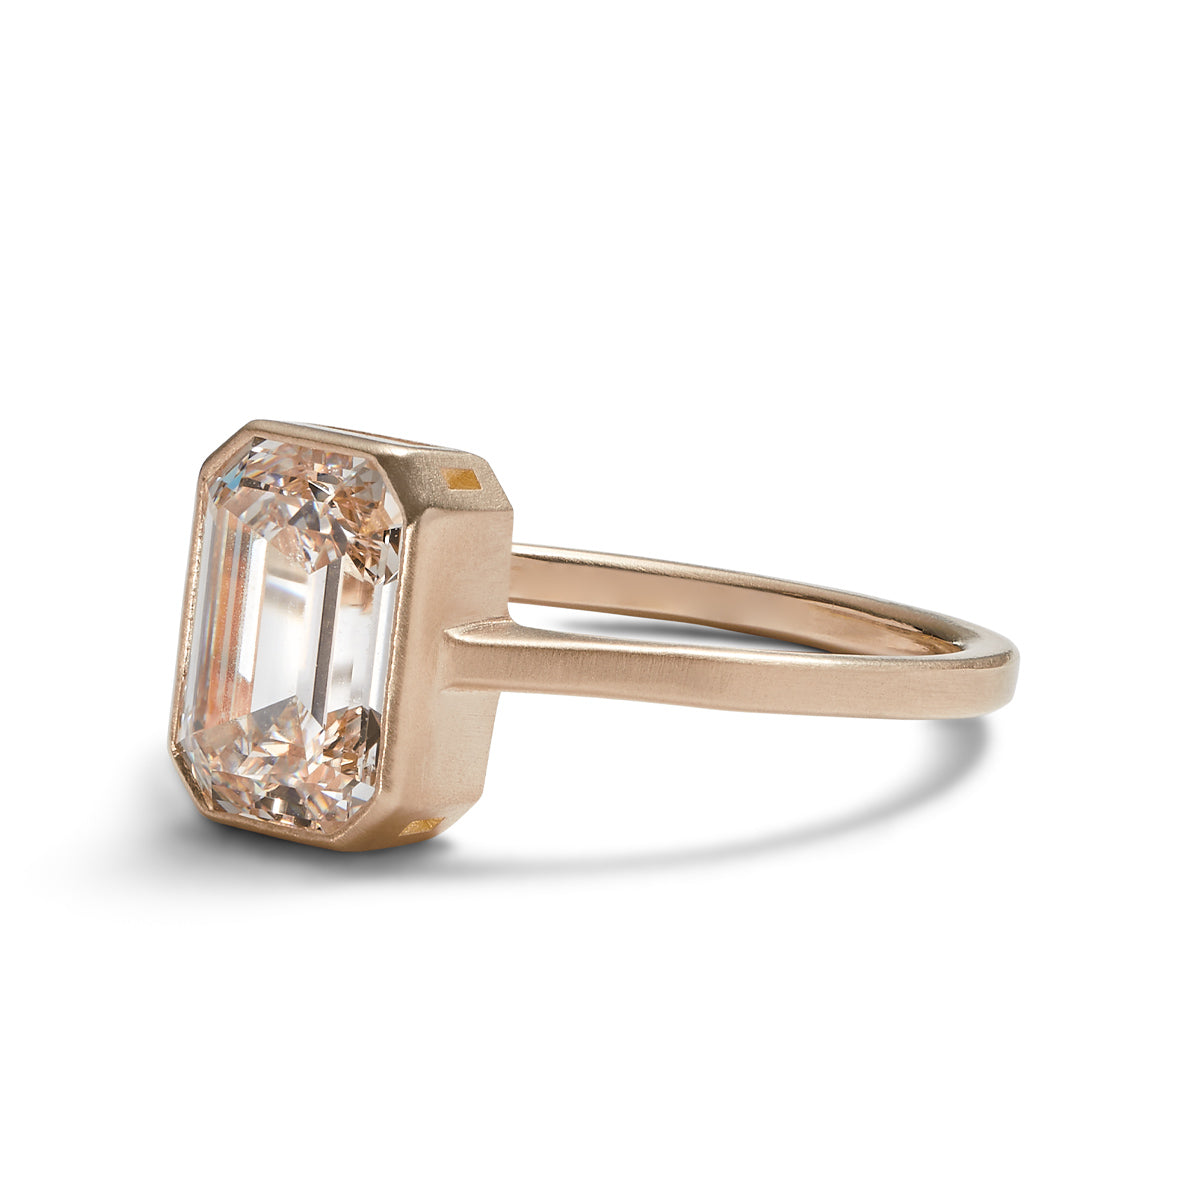 Emerald cut lab-grown diamond Honos ring (1.75 carat). Set in 14K recycled gold and made in Portland, Oregon.